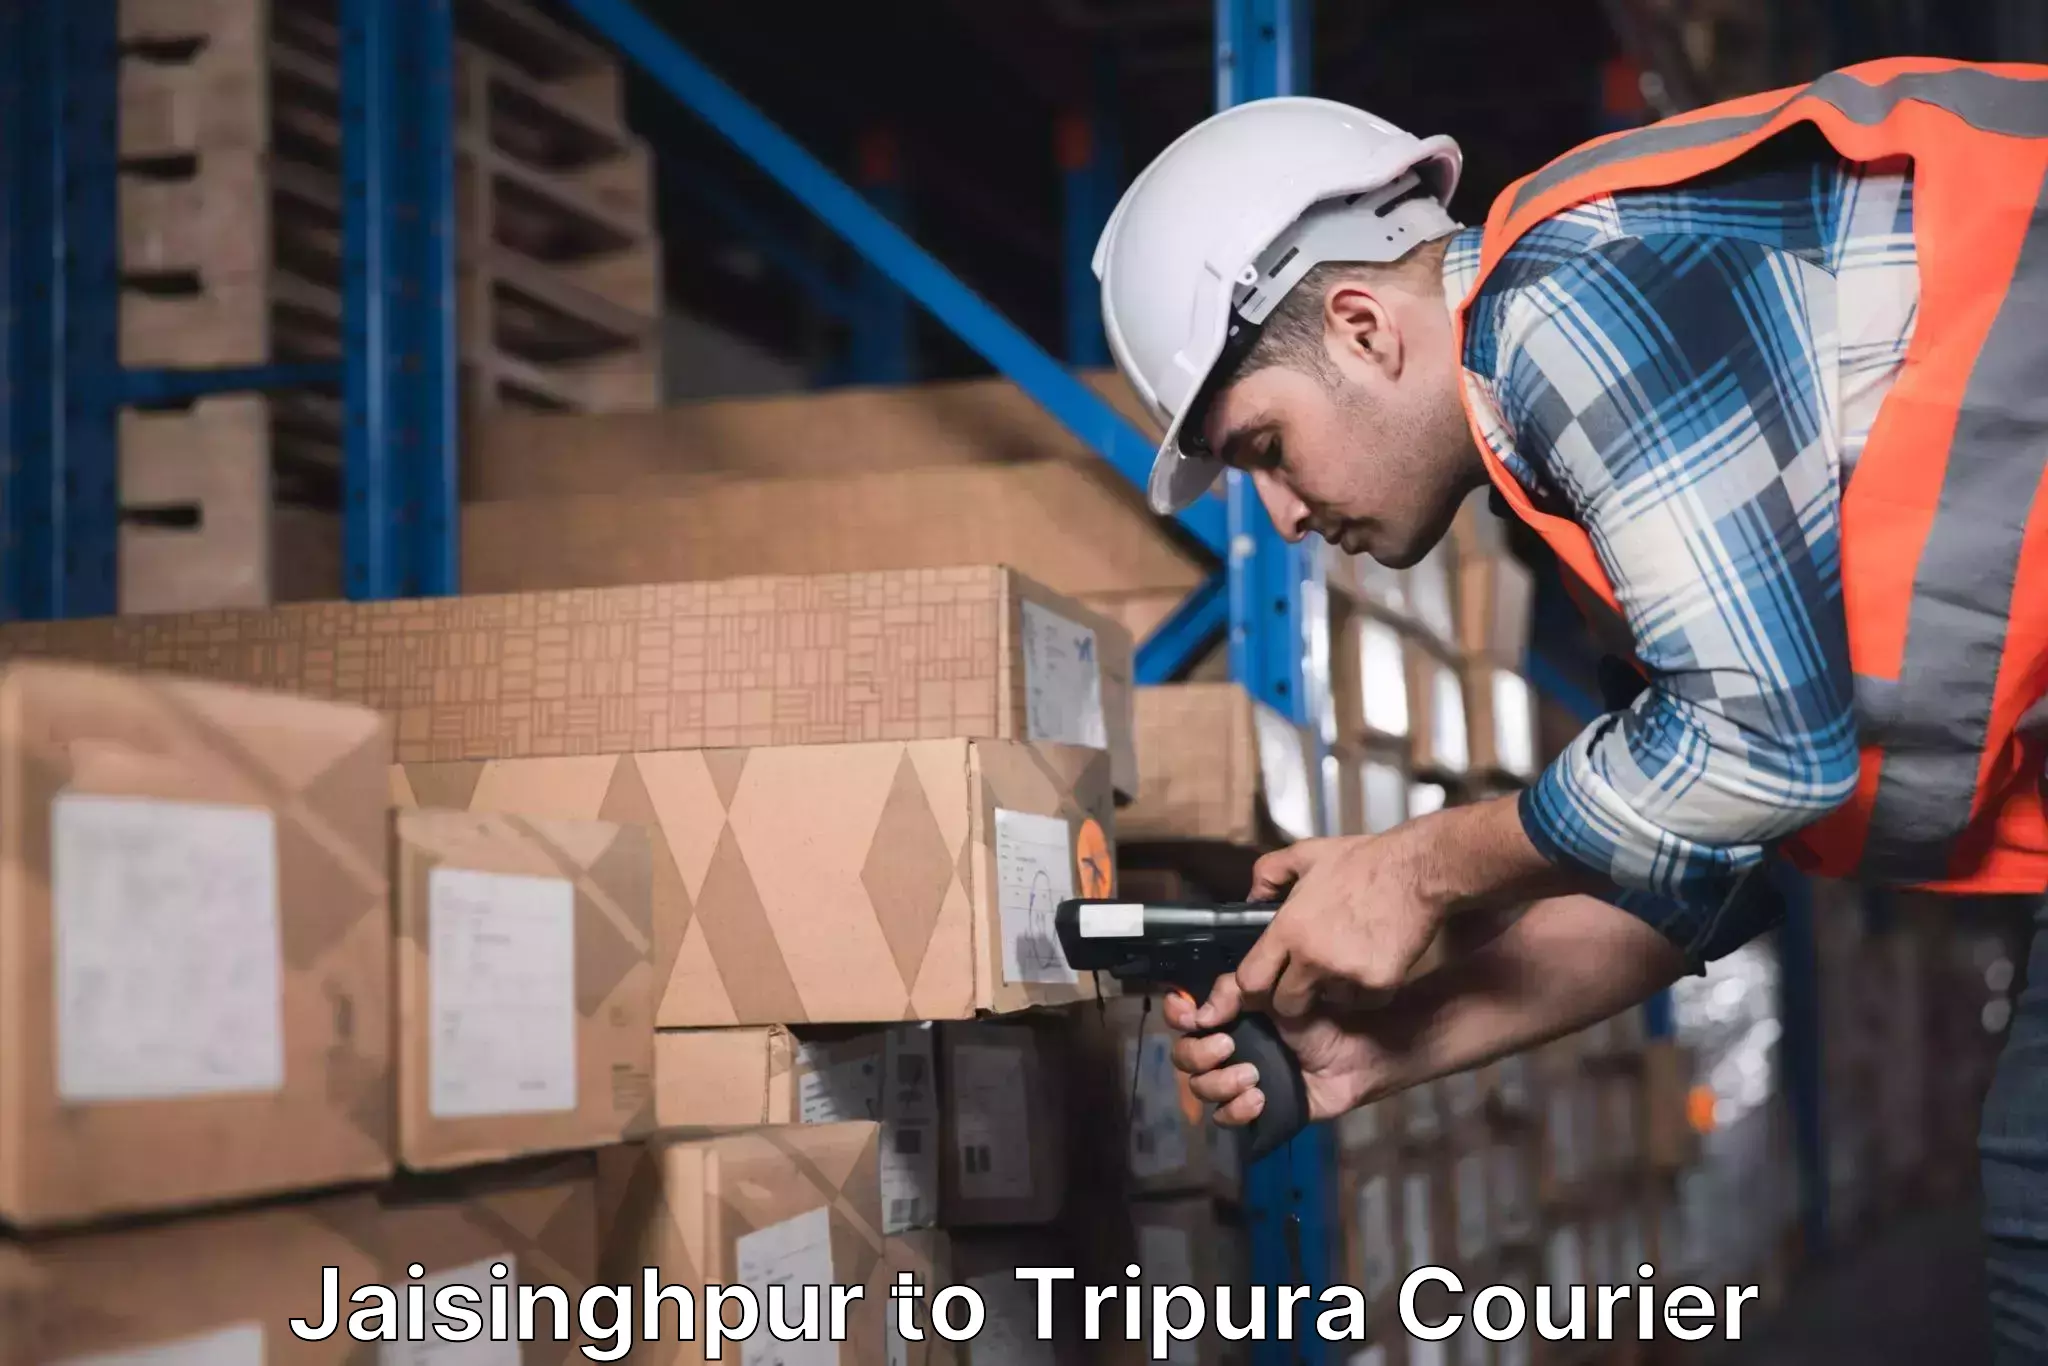 Easy access courier services in Jaisinghpur to Dhalai